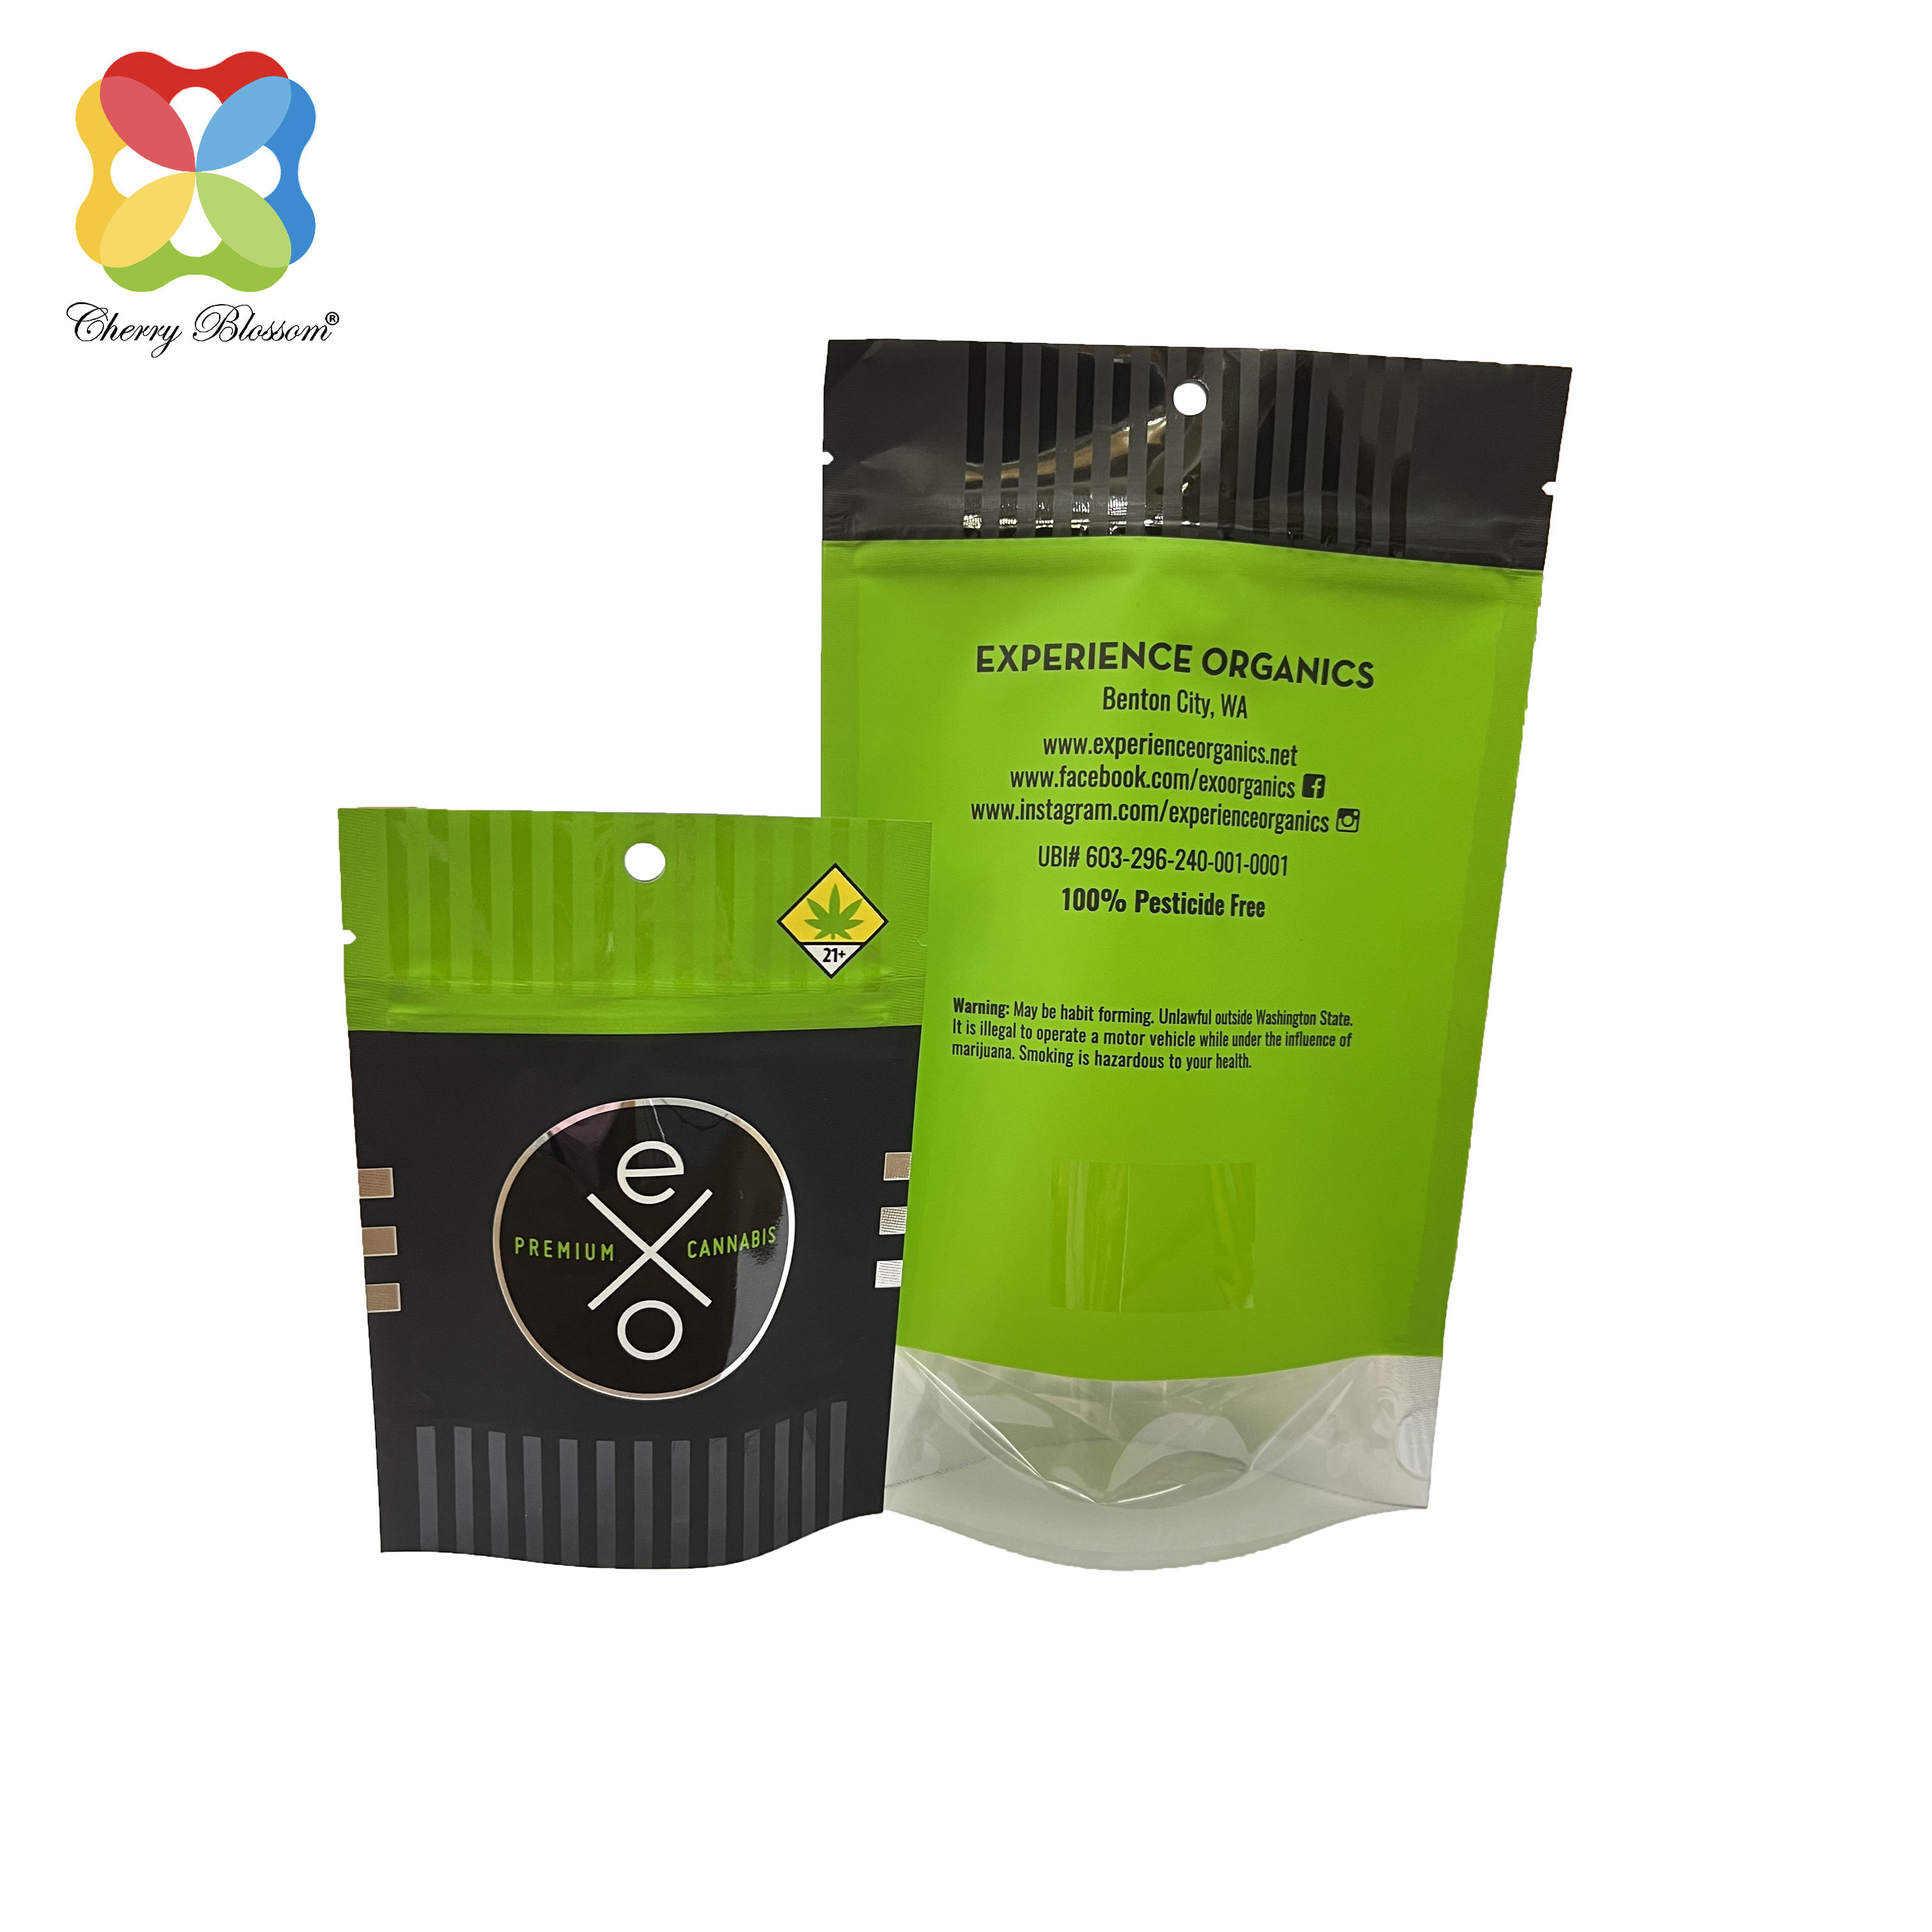 stand up pouch
tea packaging
packaging bag
food packgaing